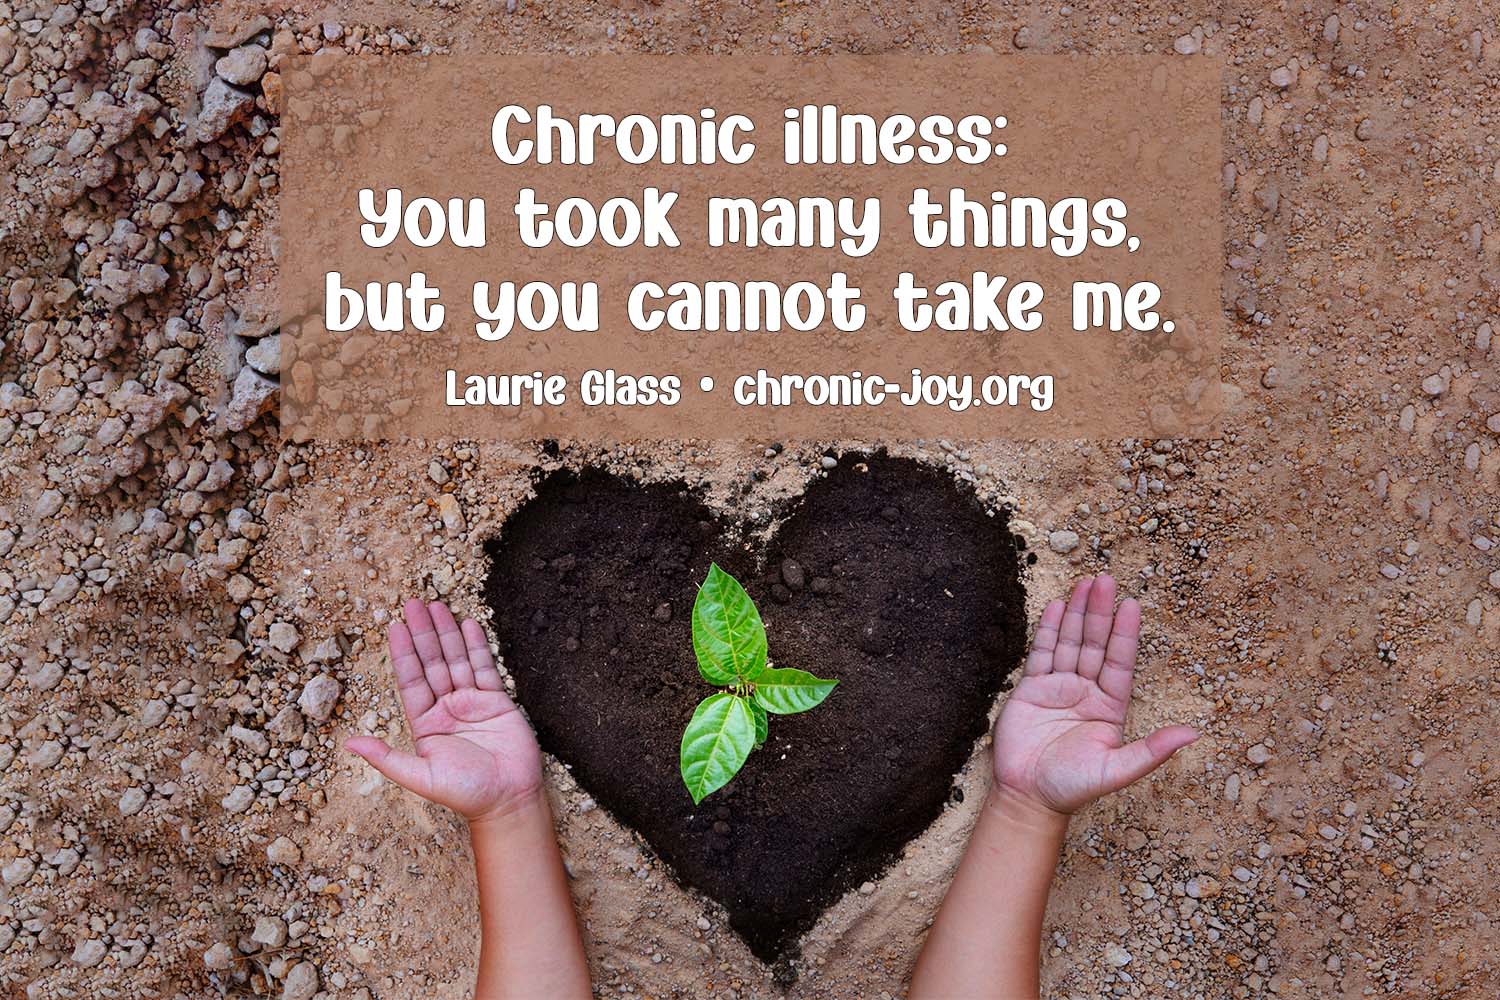 Chronic Illness Cannot Take Me - a poem by Laurie Glass